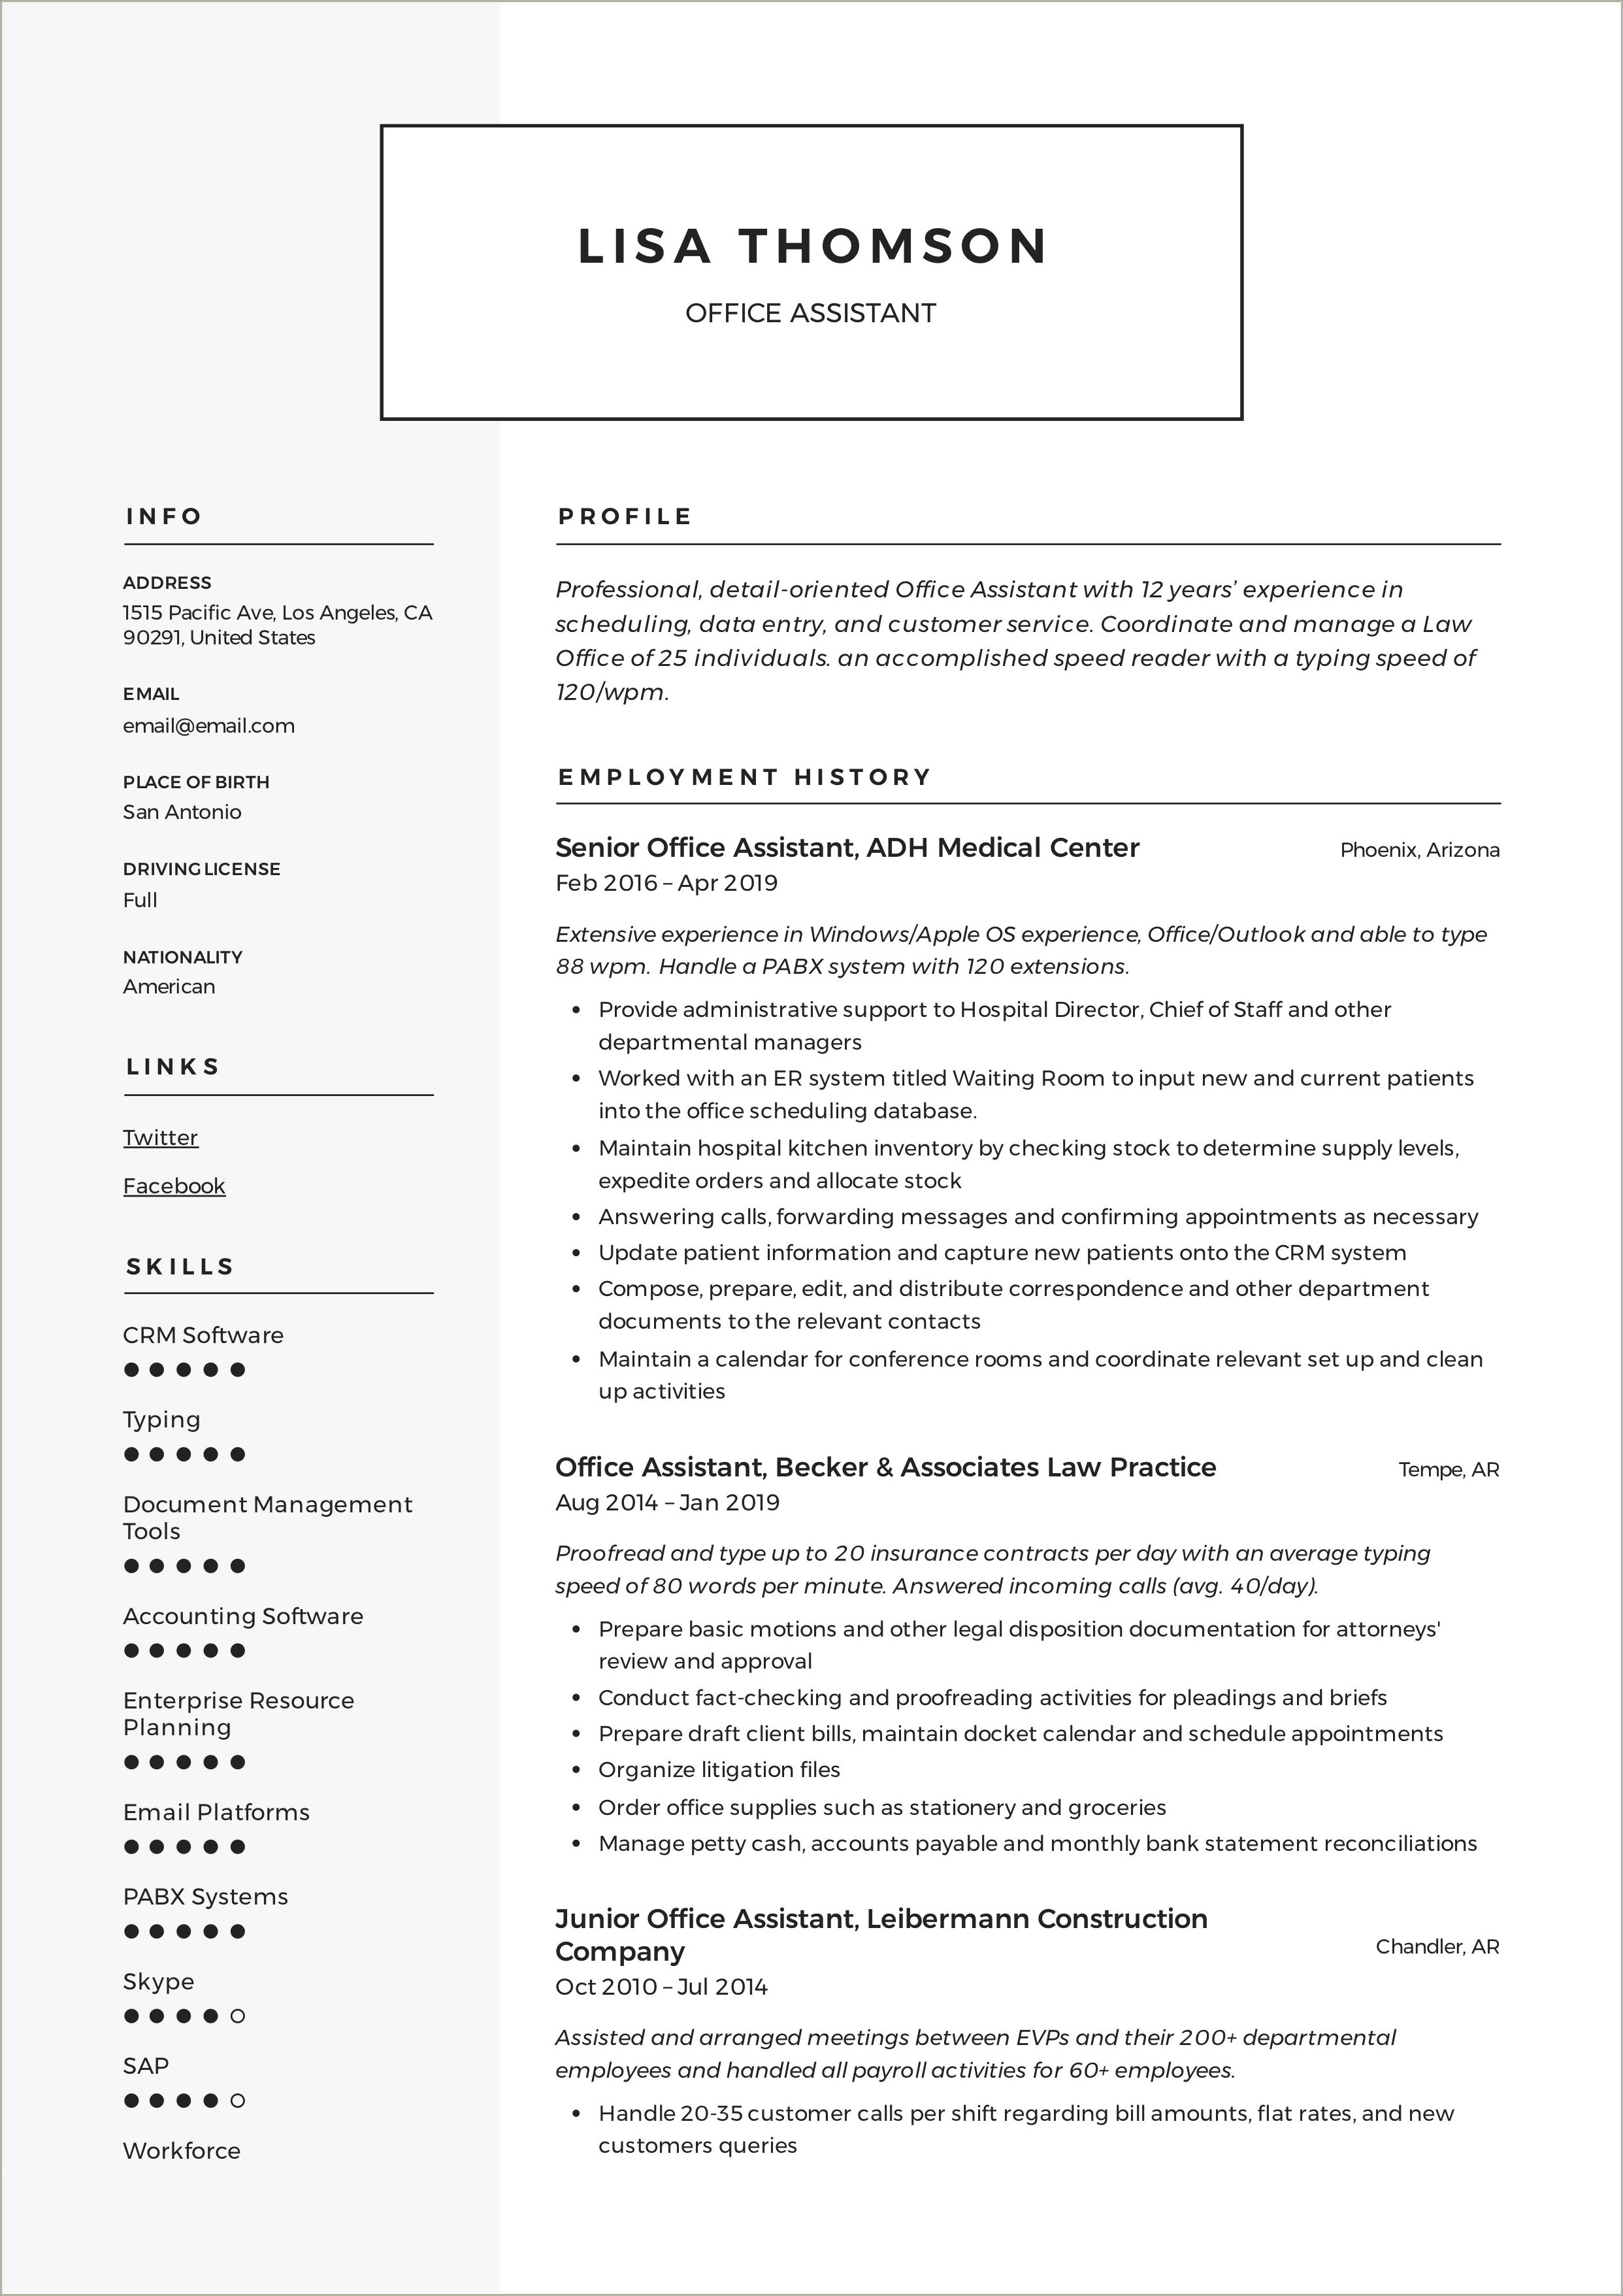 Blurb On Resume For Office Worker